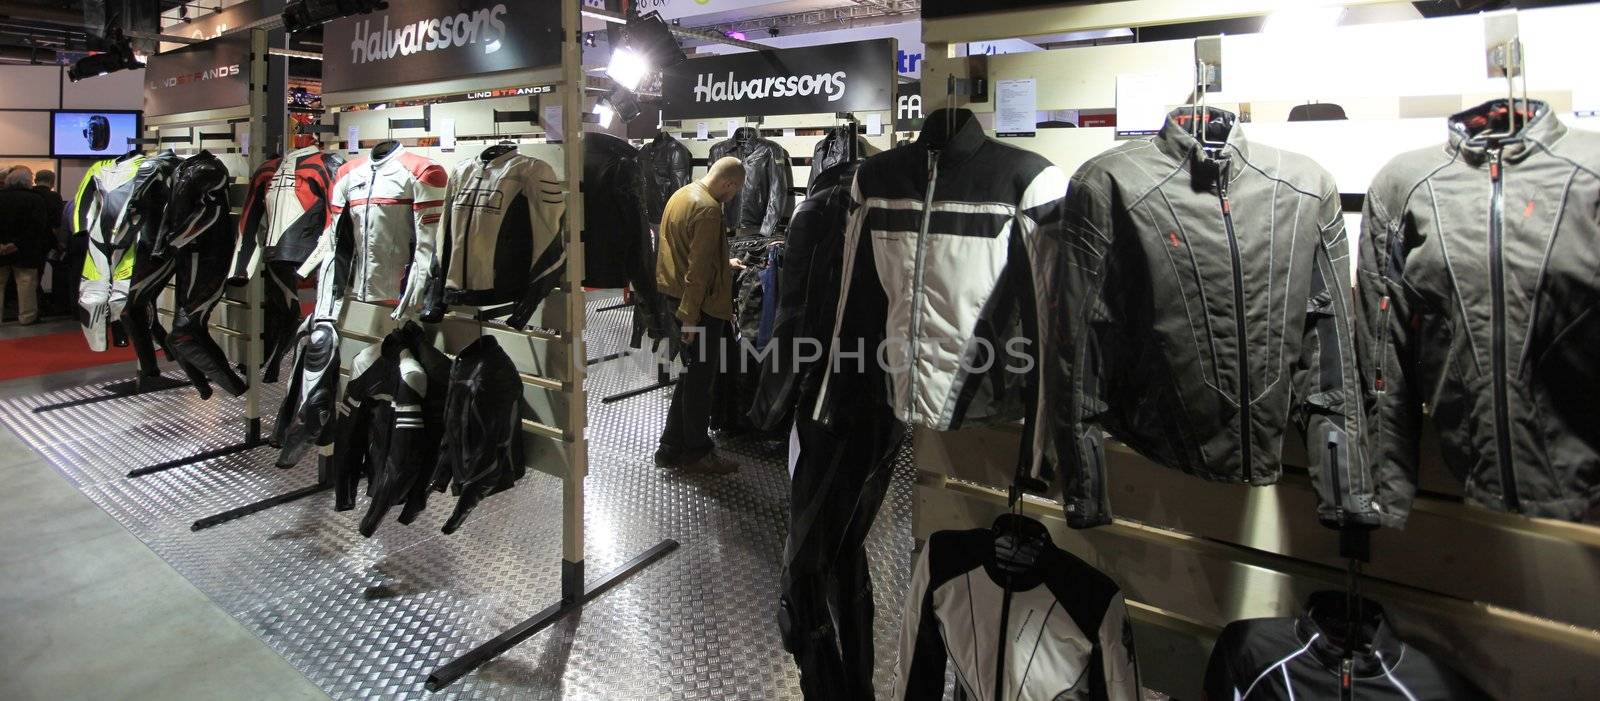 Motorcycles accessories in exhibition at EICMA, International Motorcycle Exhibition in Milan, Italy.